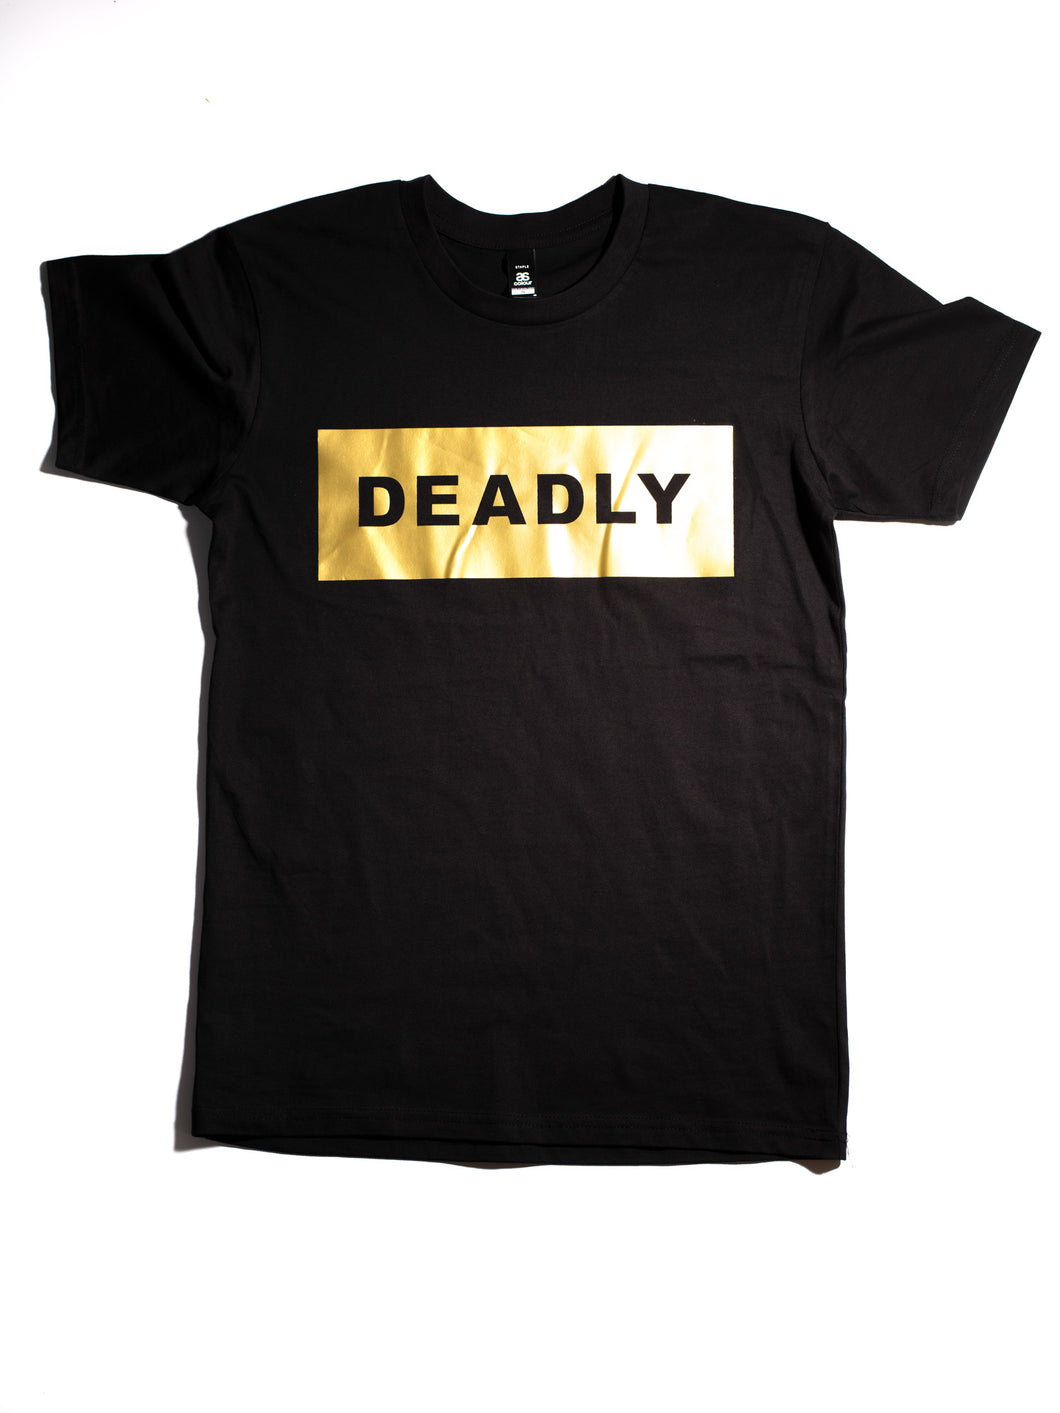 DEADLY Solid Gold Tee